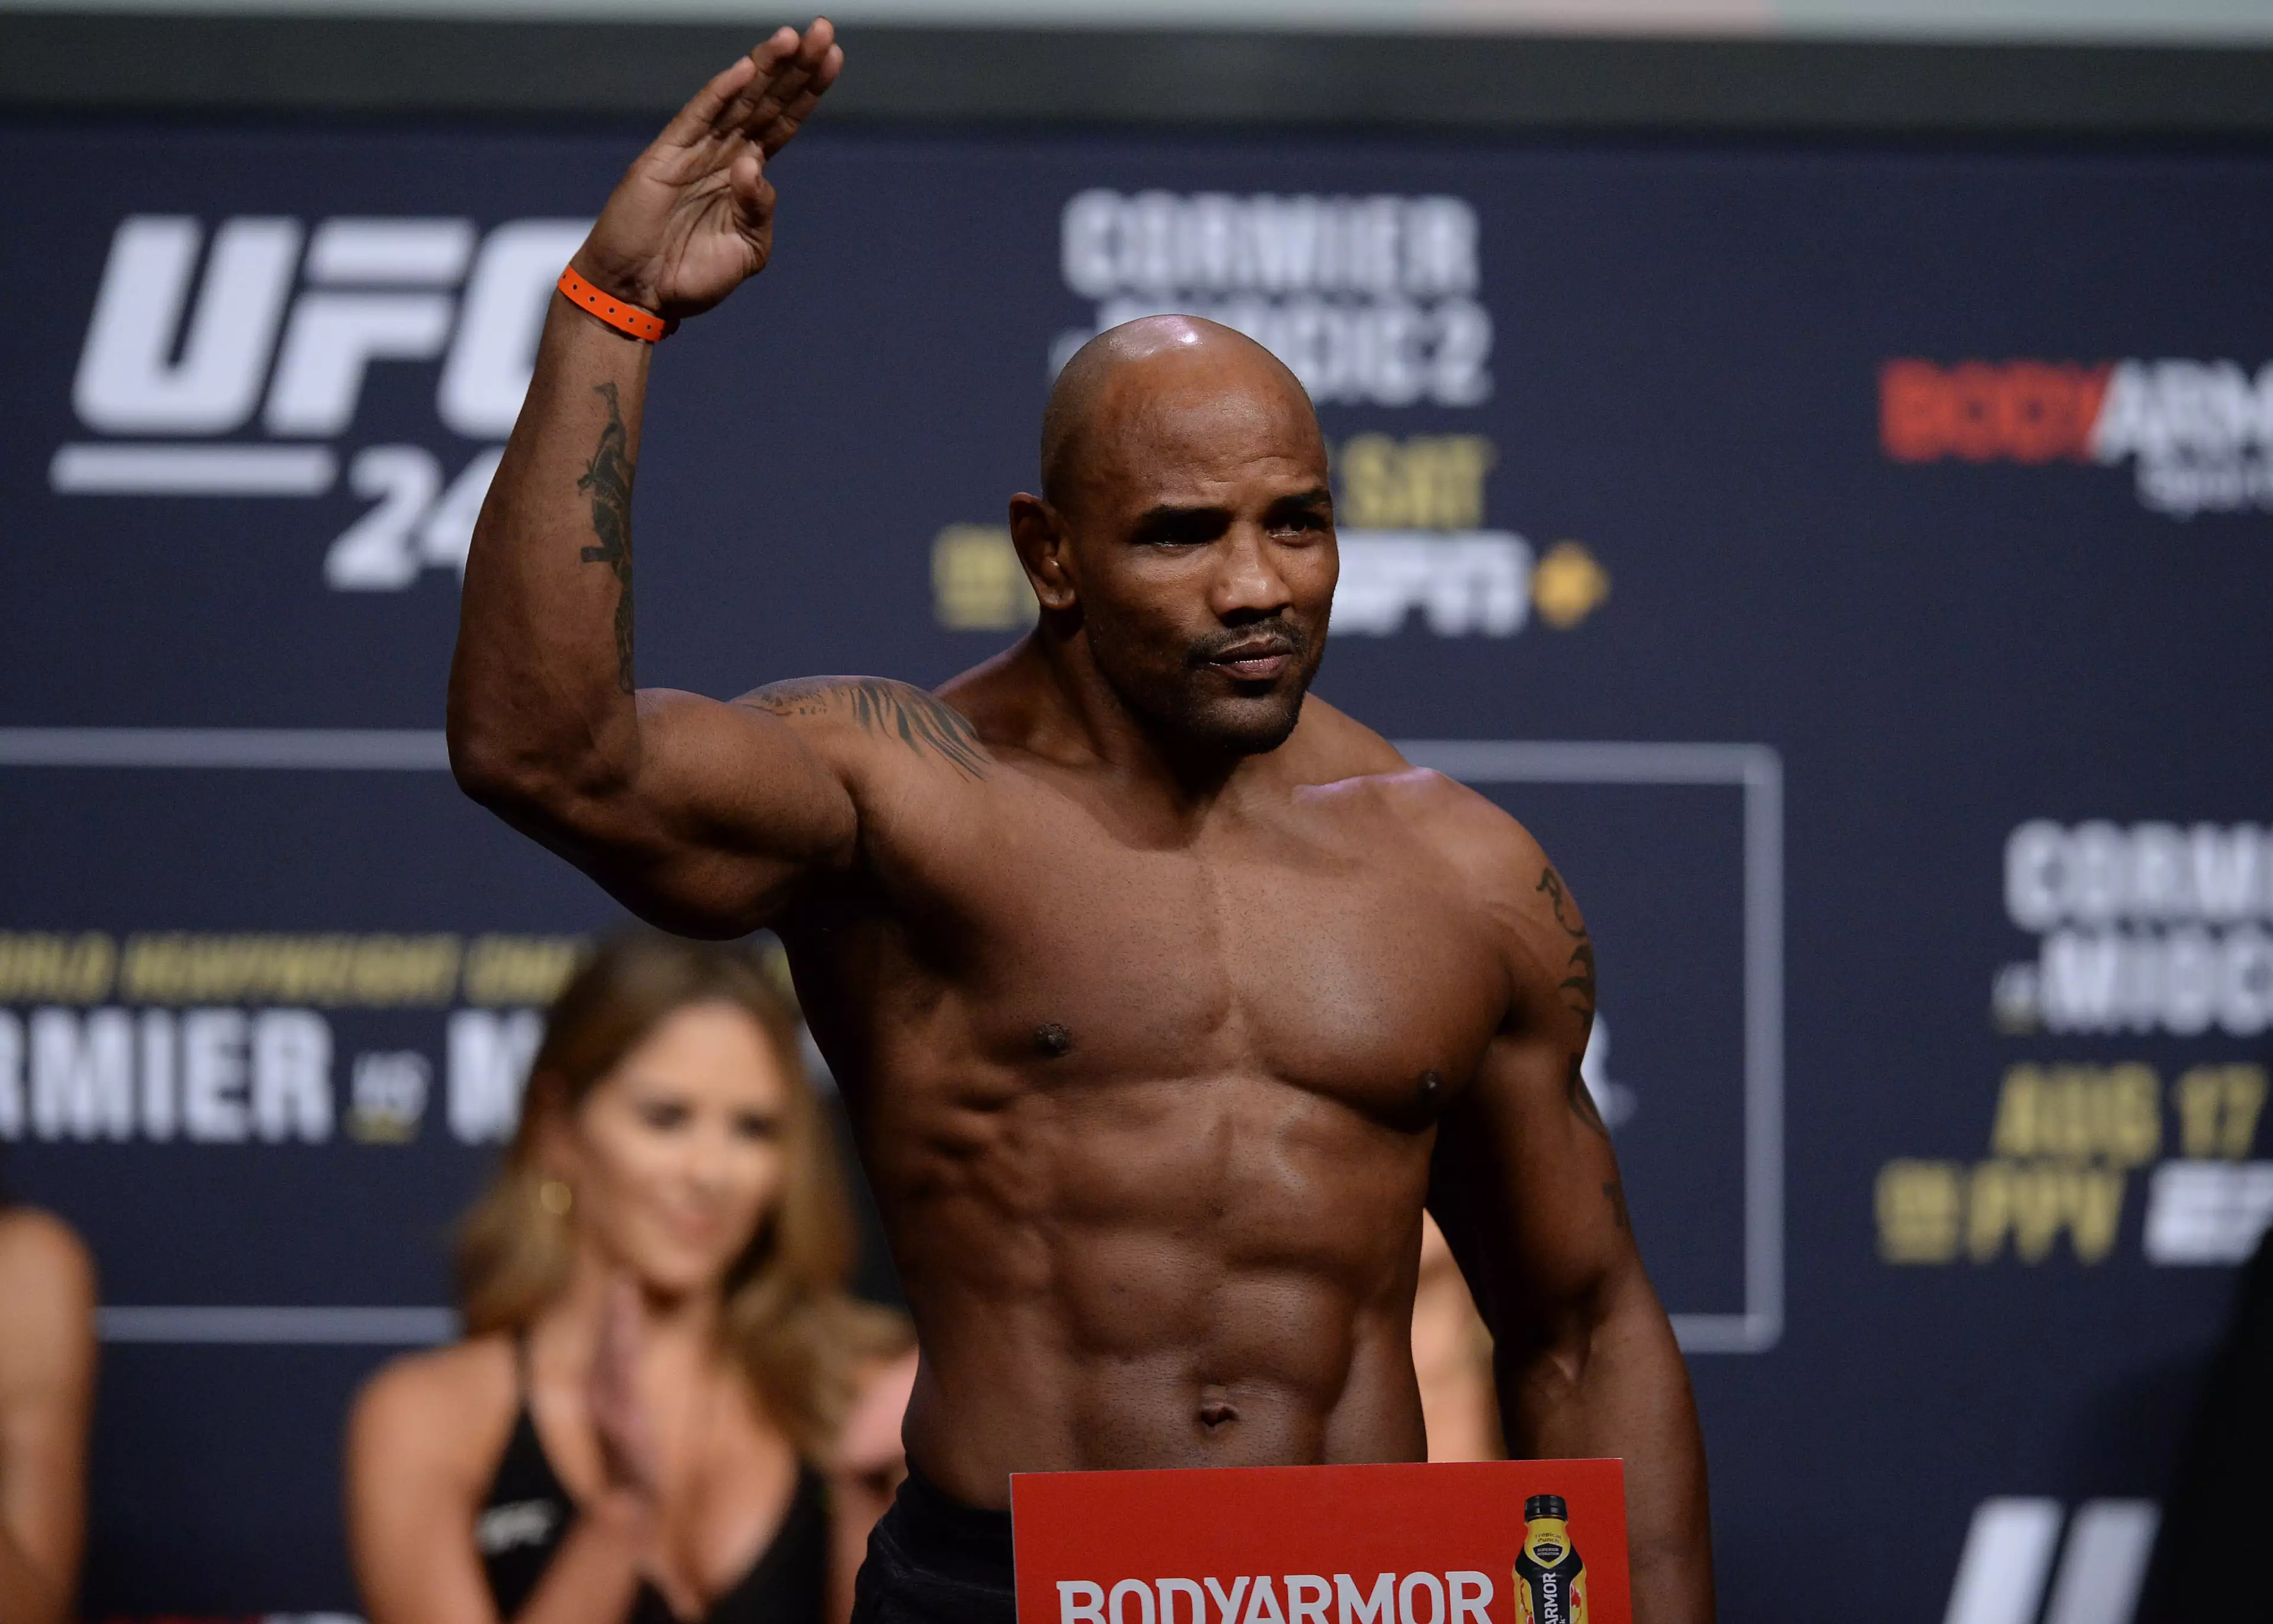 Yoel Romero at the weigh-ins for his bout against Paulo Costa.